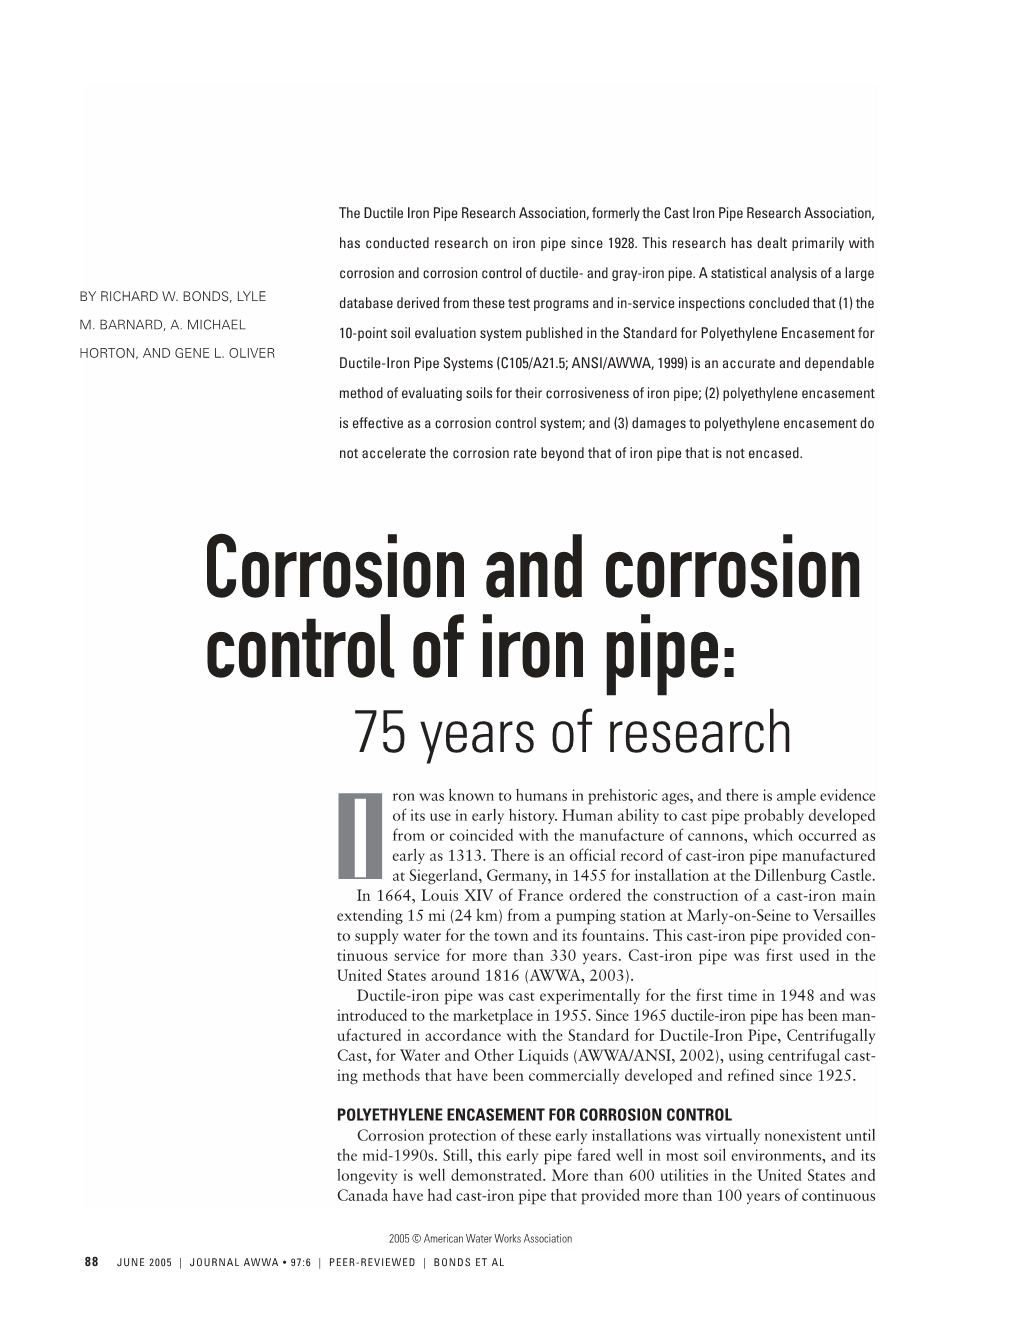 The Cast Iron Pipe Research Association, Has Conducted Research on Iron Pipe Since 1928